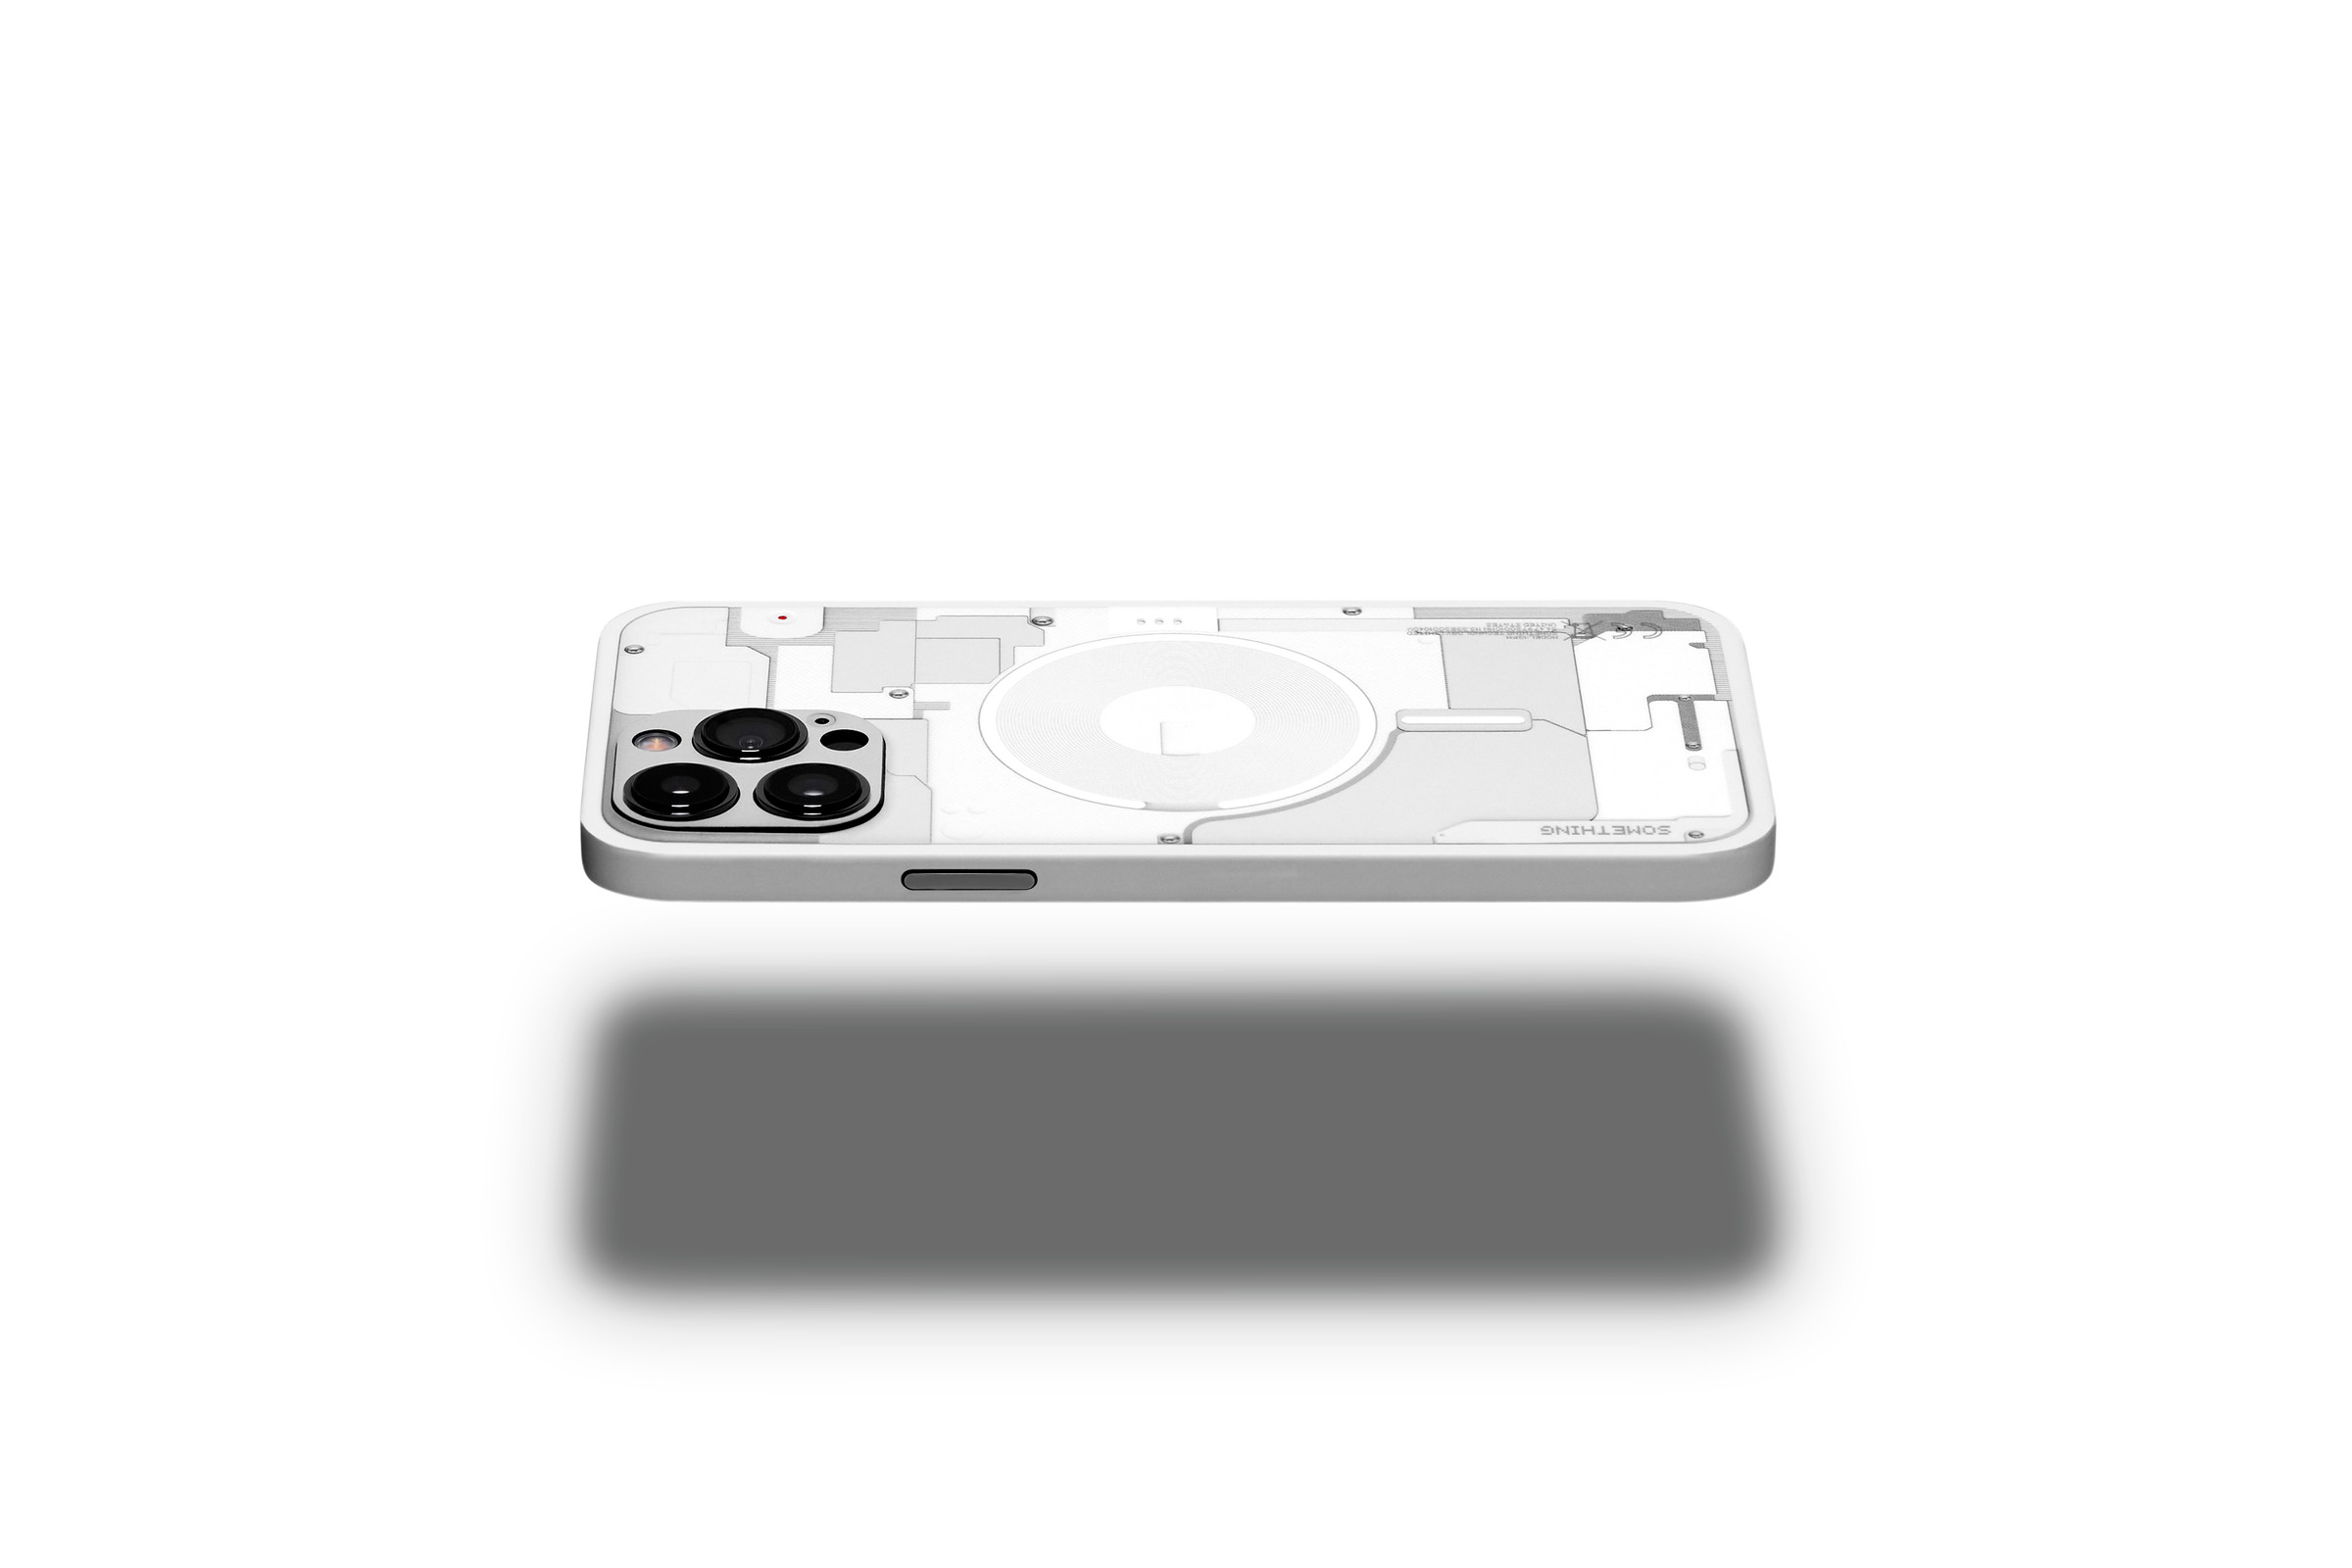 An iPhone floats on a white void, the rear is tilted towards the viewer and you can see the details of the internals of the iPhone, but in white geometric shapes, similar to the nothing phone design.